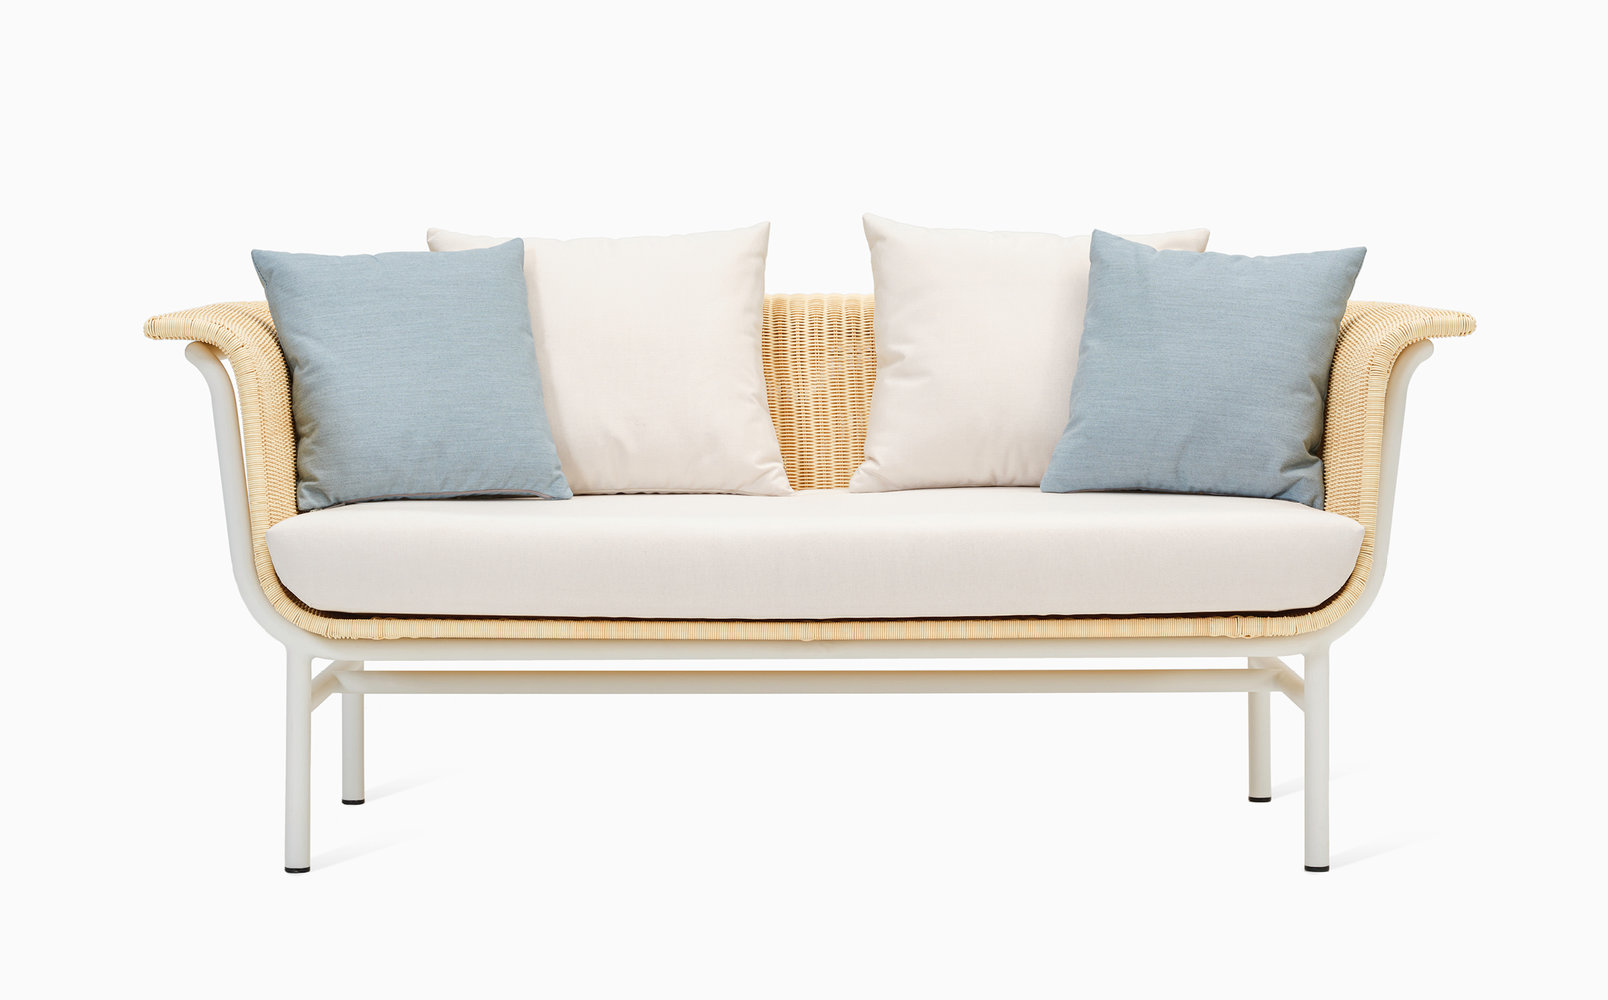 vincent-sheppard-wicked-lounge-sofa-2S-white-natural